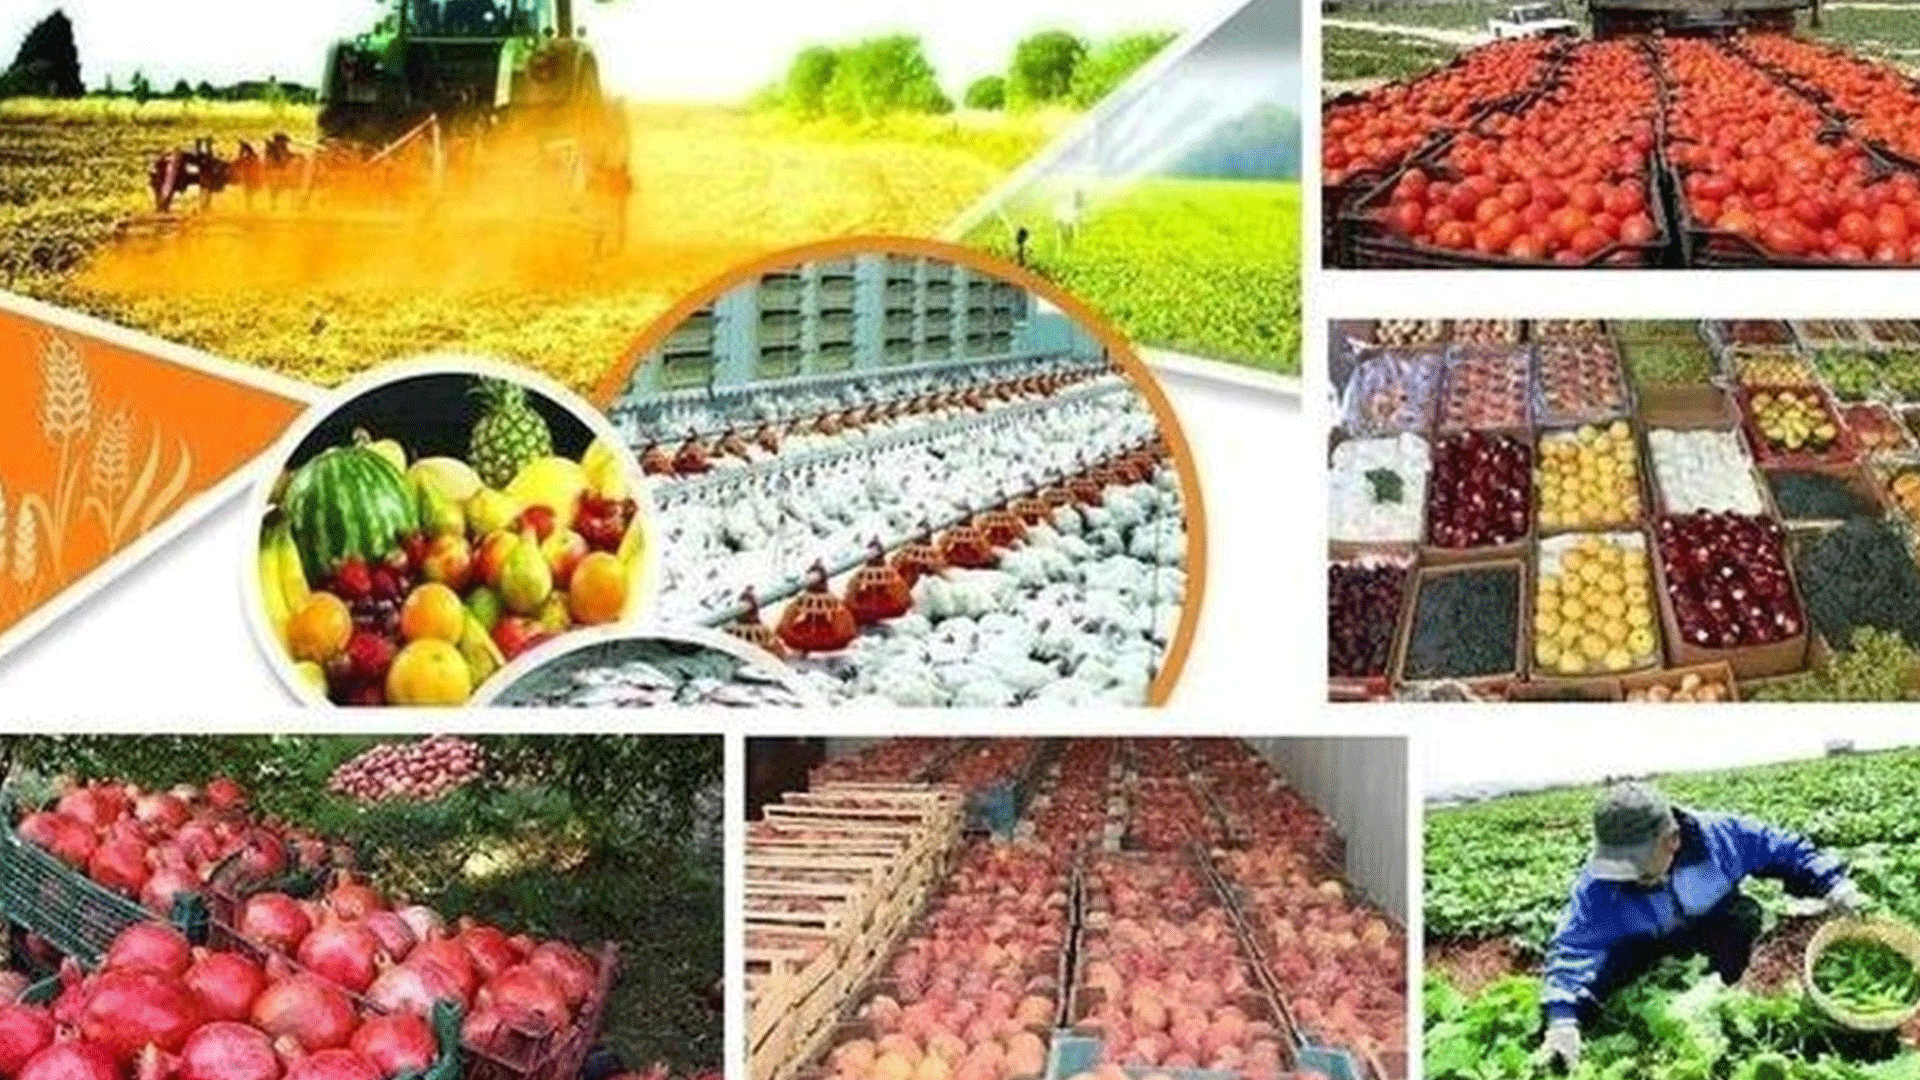 Iran’s-agriculture-and-foodstuffs